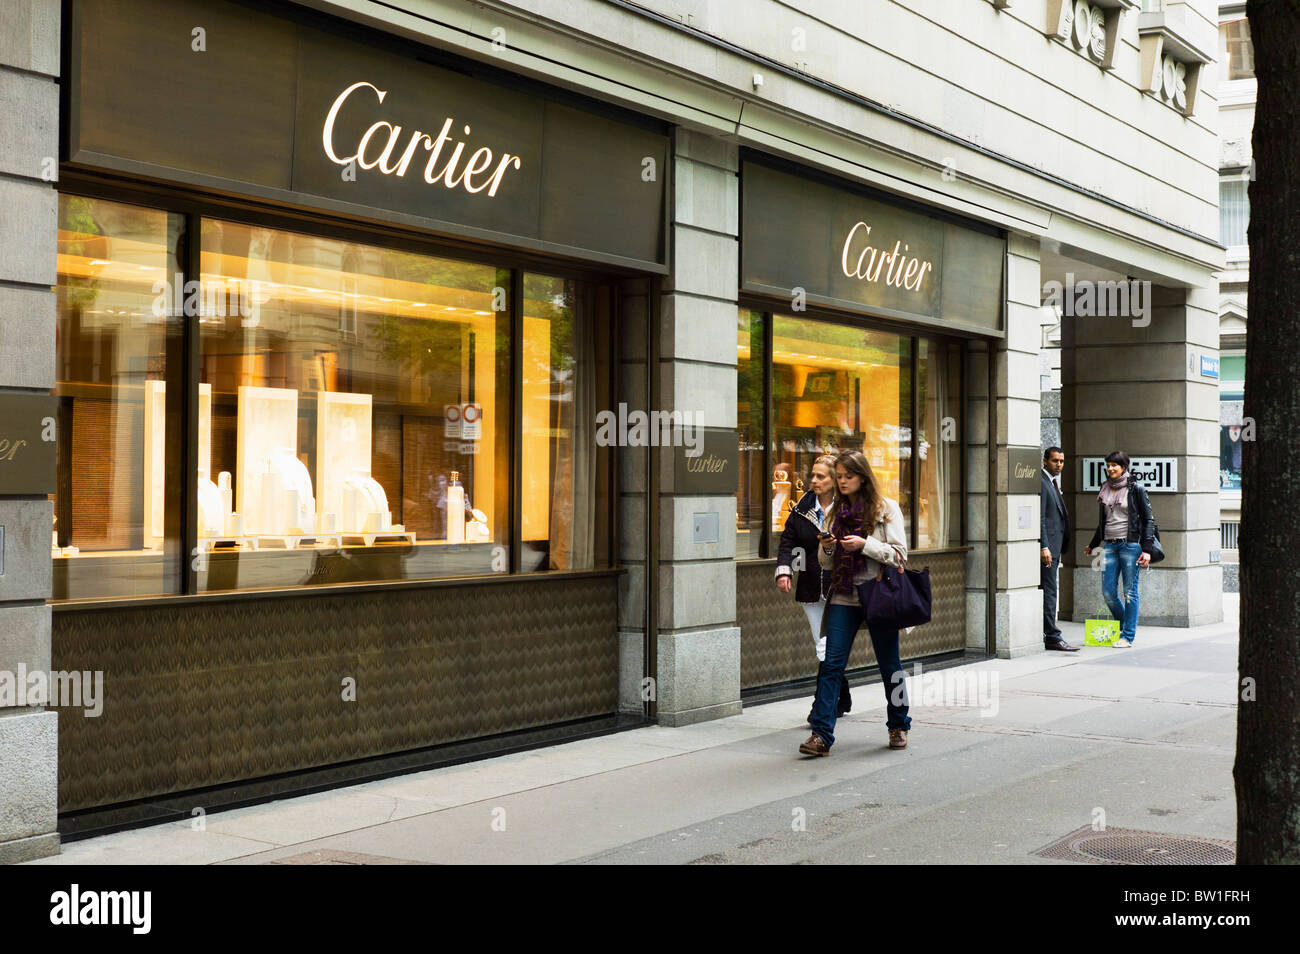 cartier stores in europe